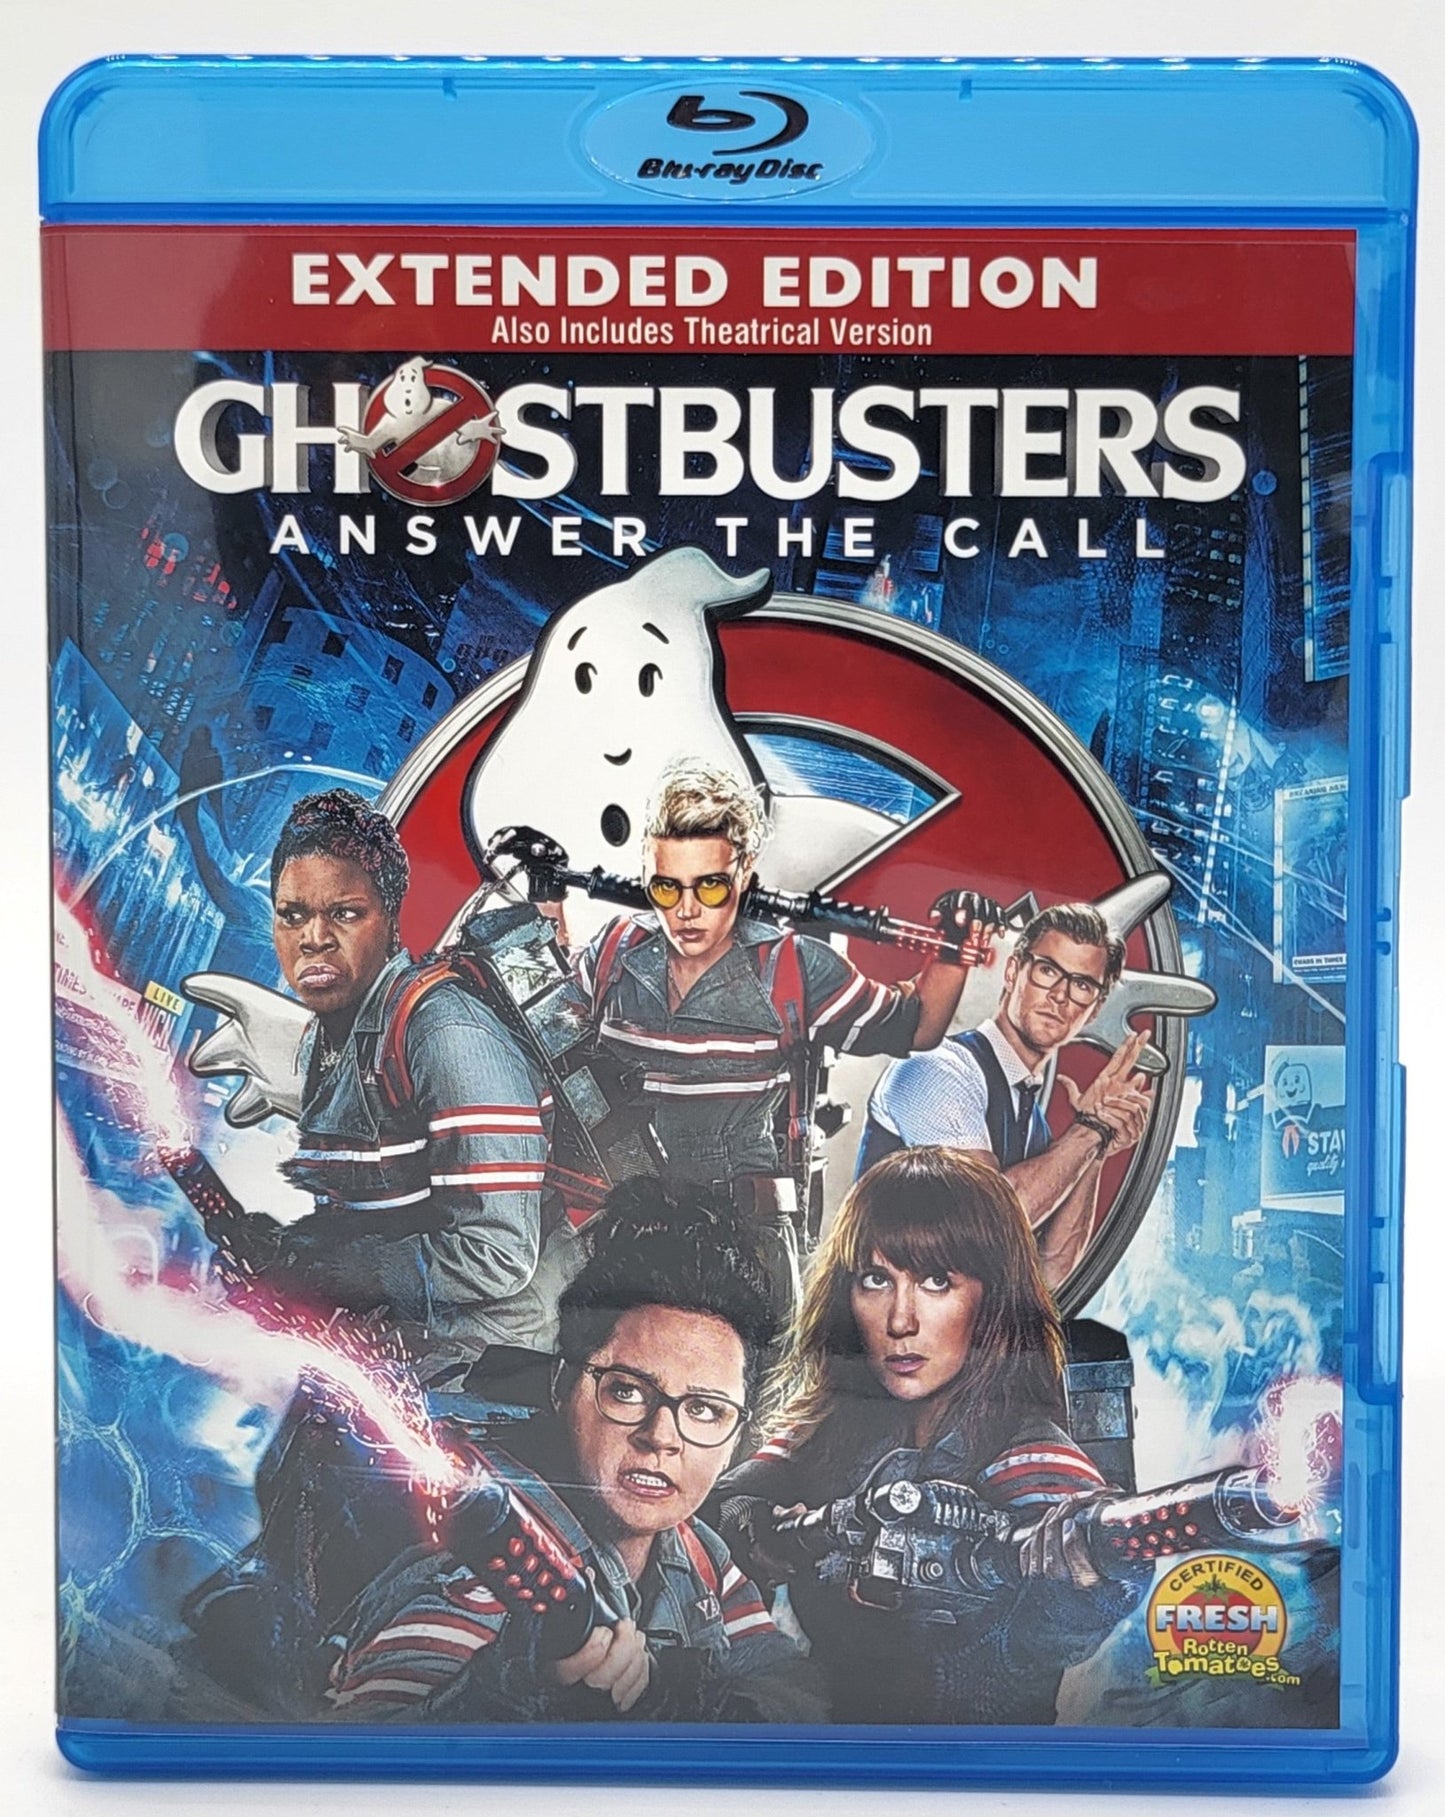 Columbia Pictures - Ghostbusters Answer the Call Extended Edition Also includes Theatrical Version - Blu-ray - Steady Bunny Shop